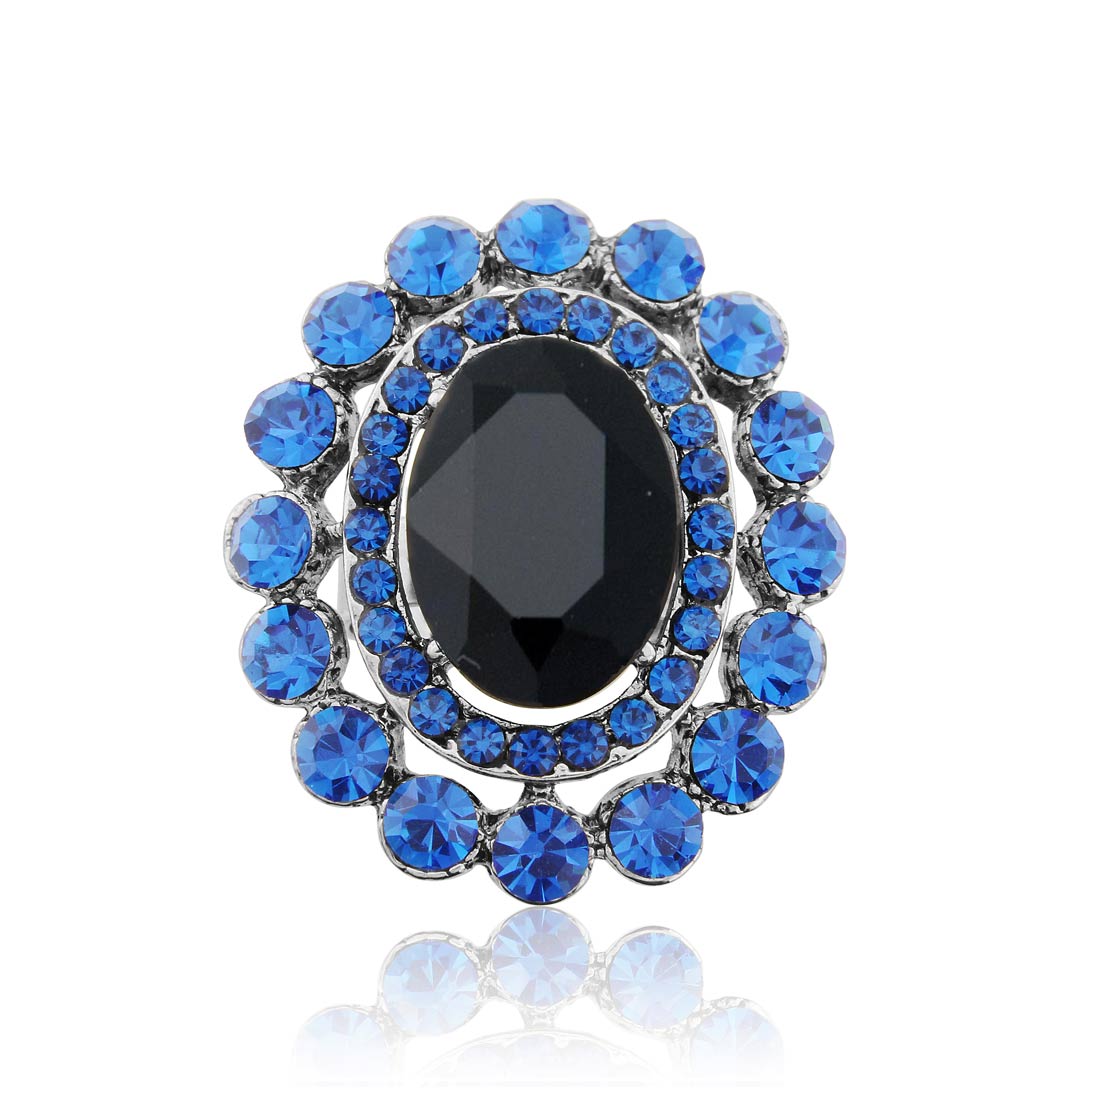 The Blues Sapphire Crystal Statement Cocktail Ring